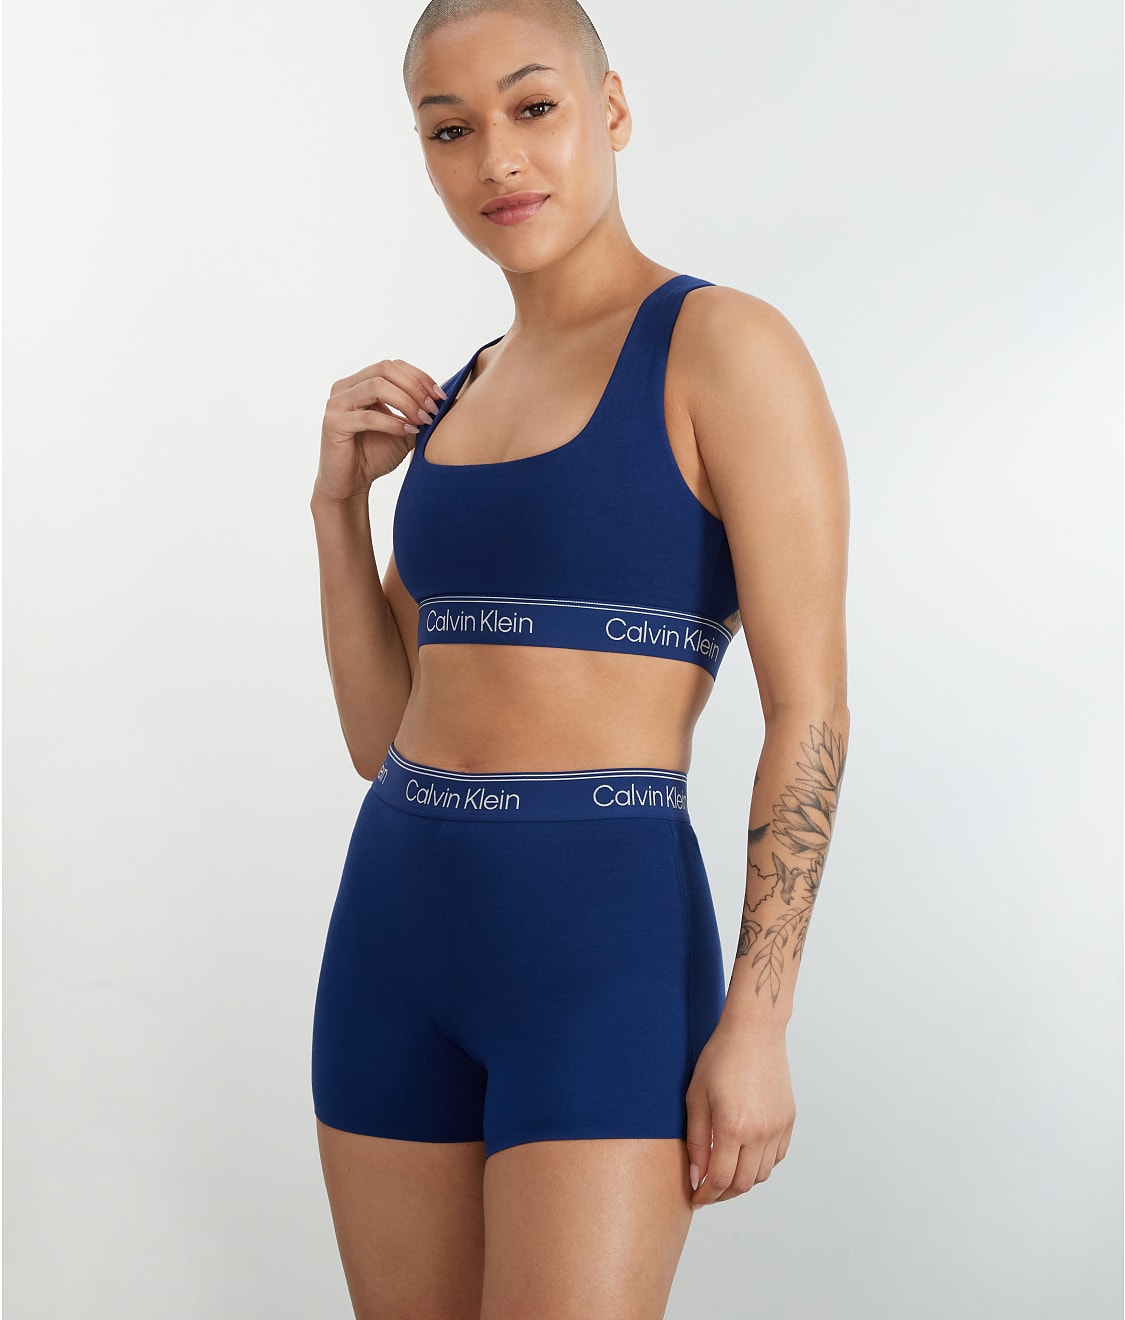 Calvin Klein Athletic Boyshorts & Reviews | Bare Necessities (Style QF7190)